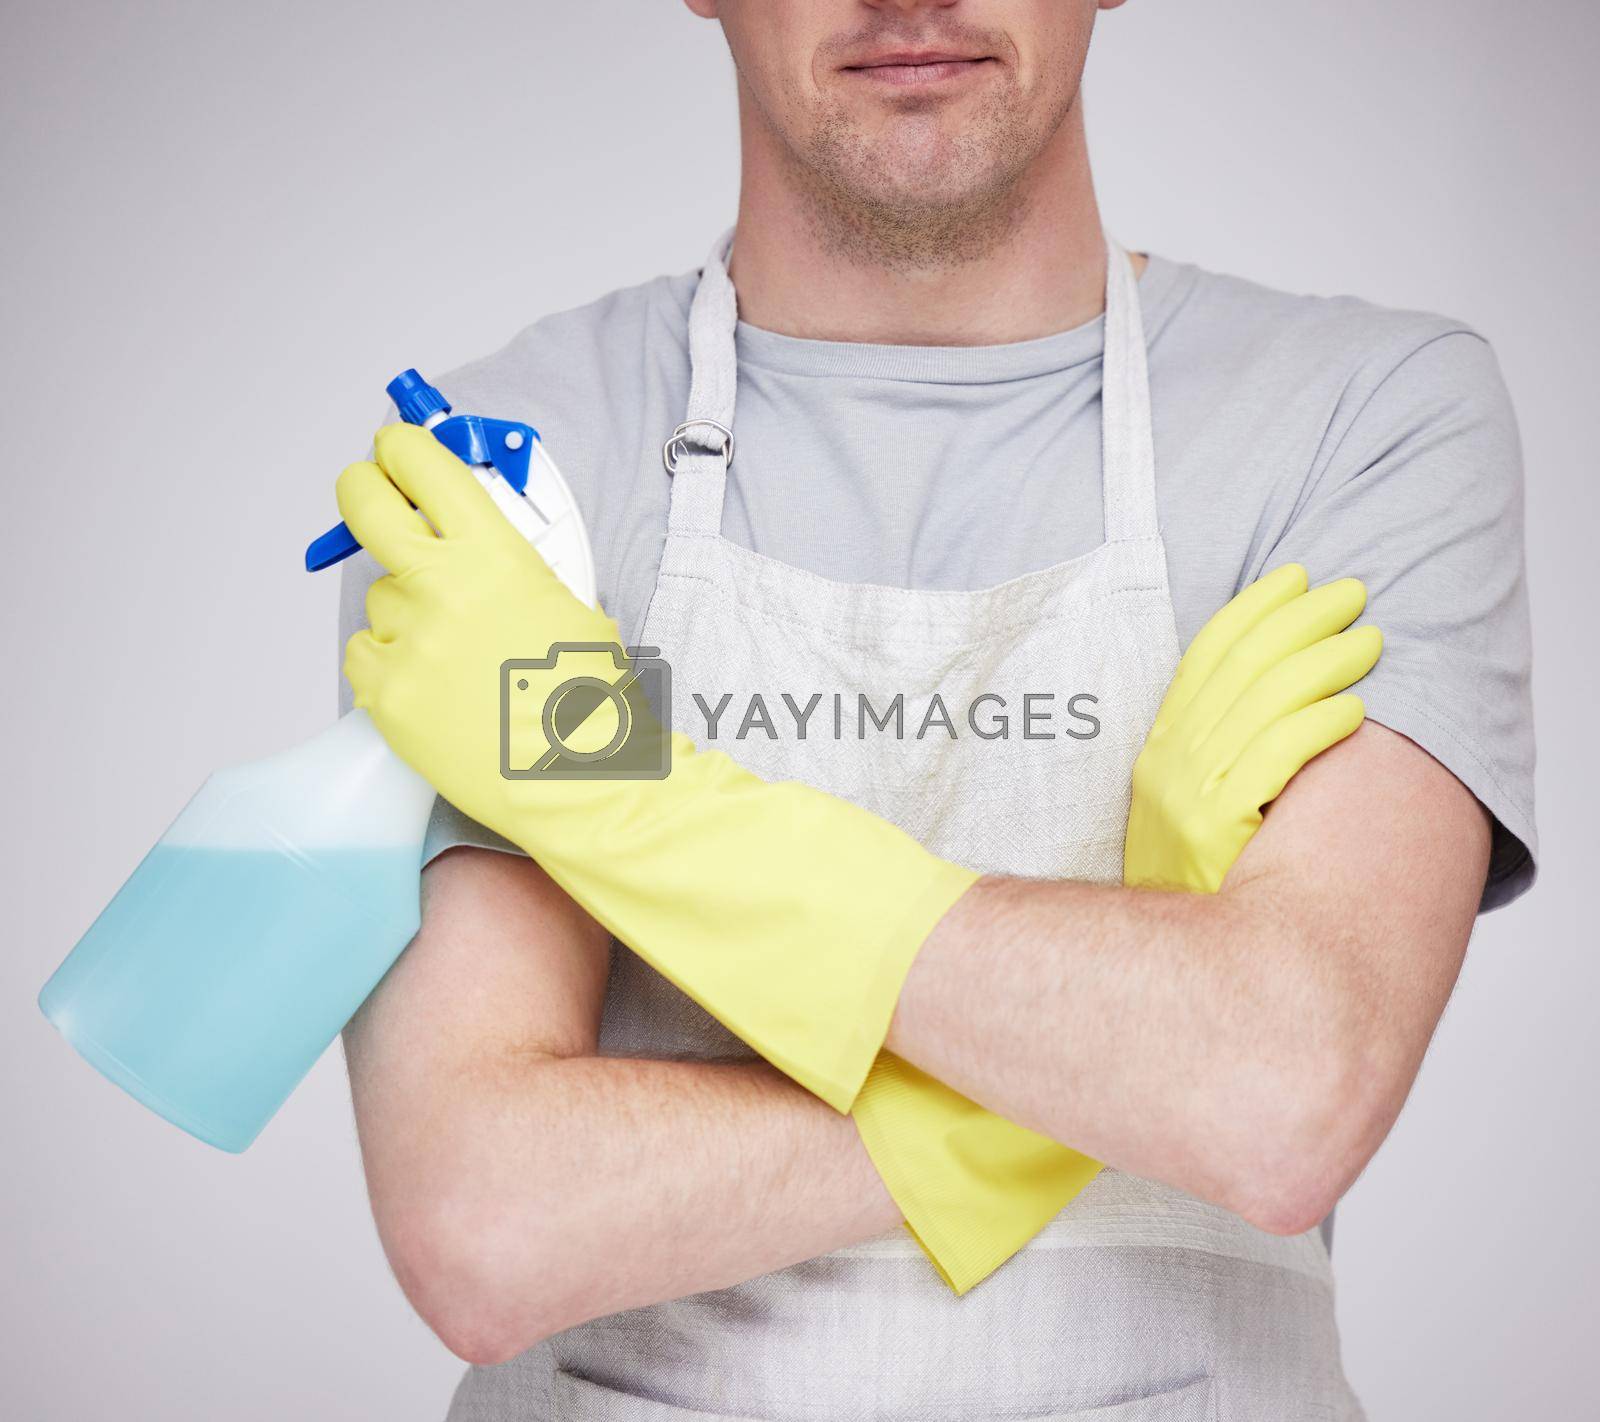 Royalty free image of What needs cleaning today. an unrecognizable man holding a spray bottle with his arms crossed against a grey background. by YuriArcurs